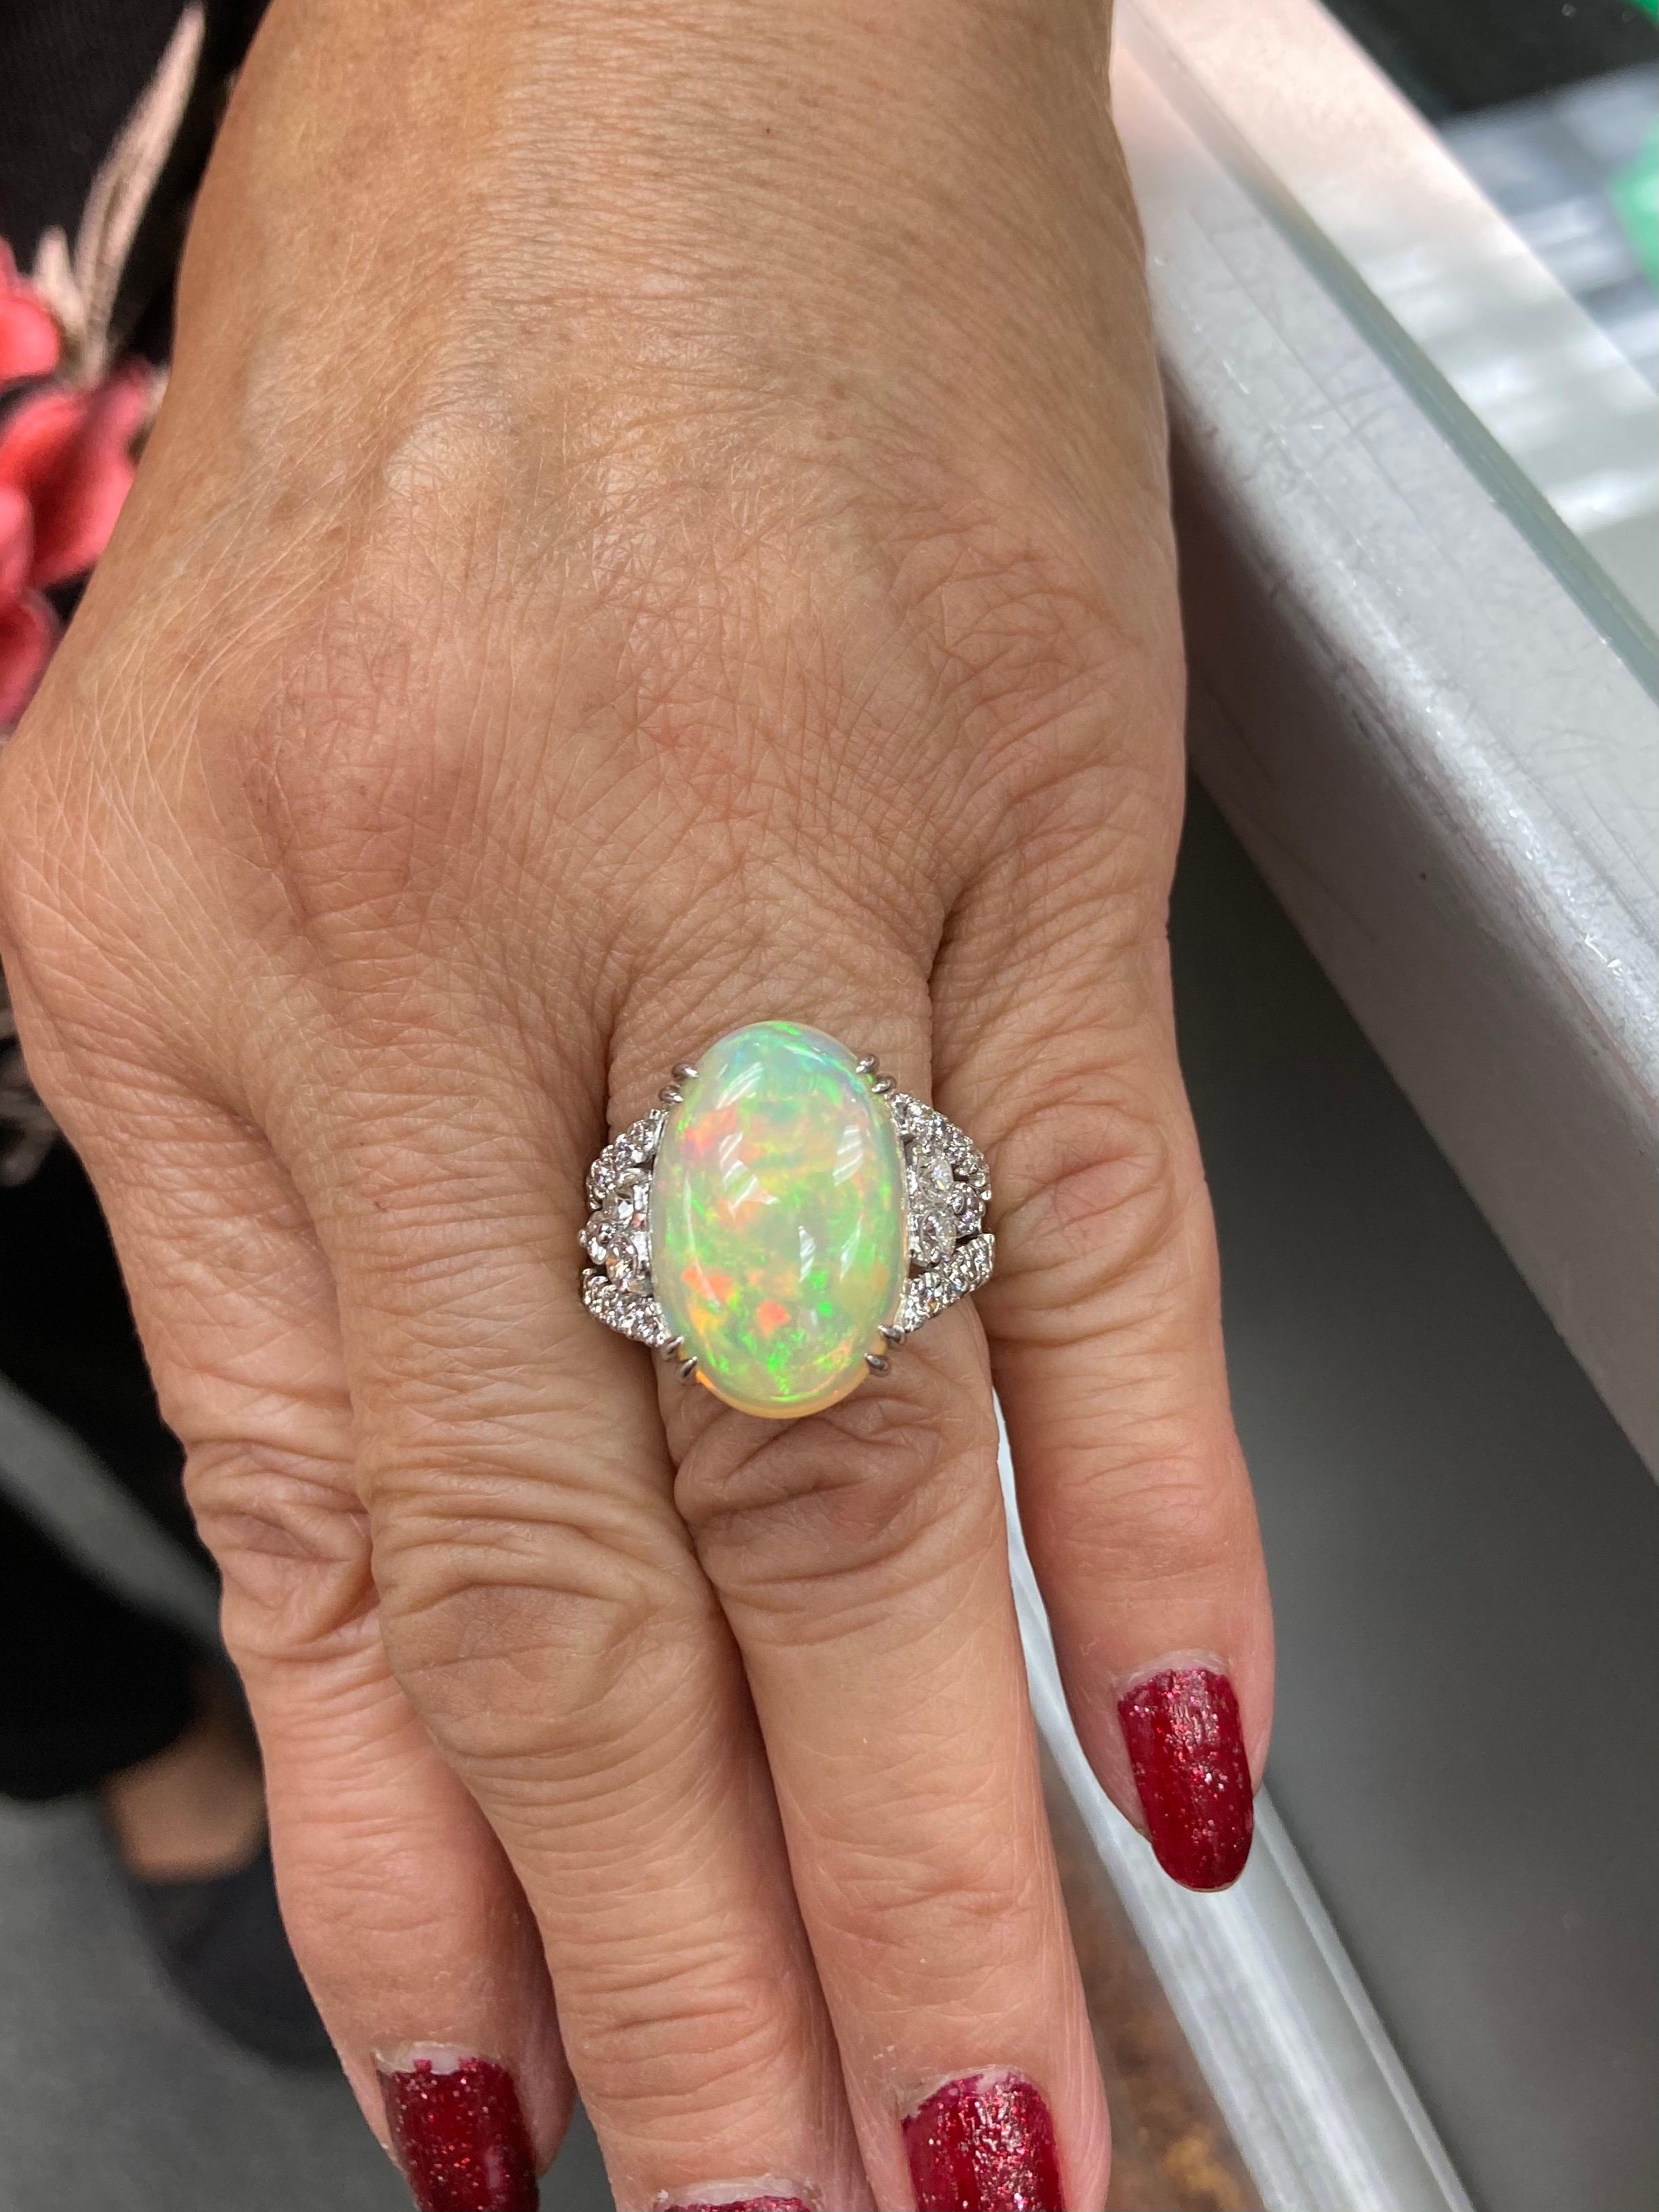 Estate opal diamond and platinum cocktail ring circa 2000.  Love it because it caught your eye, and we are here to connect you with beautiful and affordable jewelry.  Celebrate Yourself!  Simple and concise information you want to know is listed